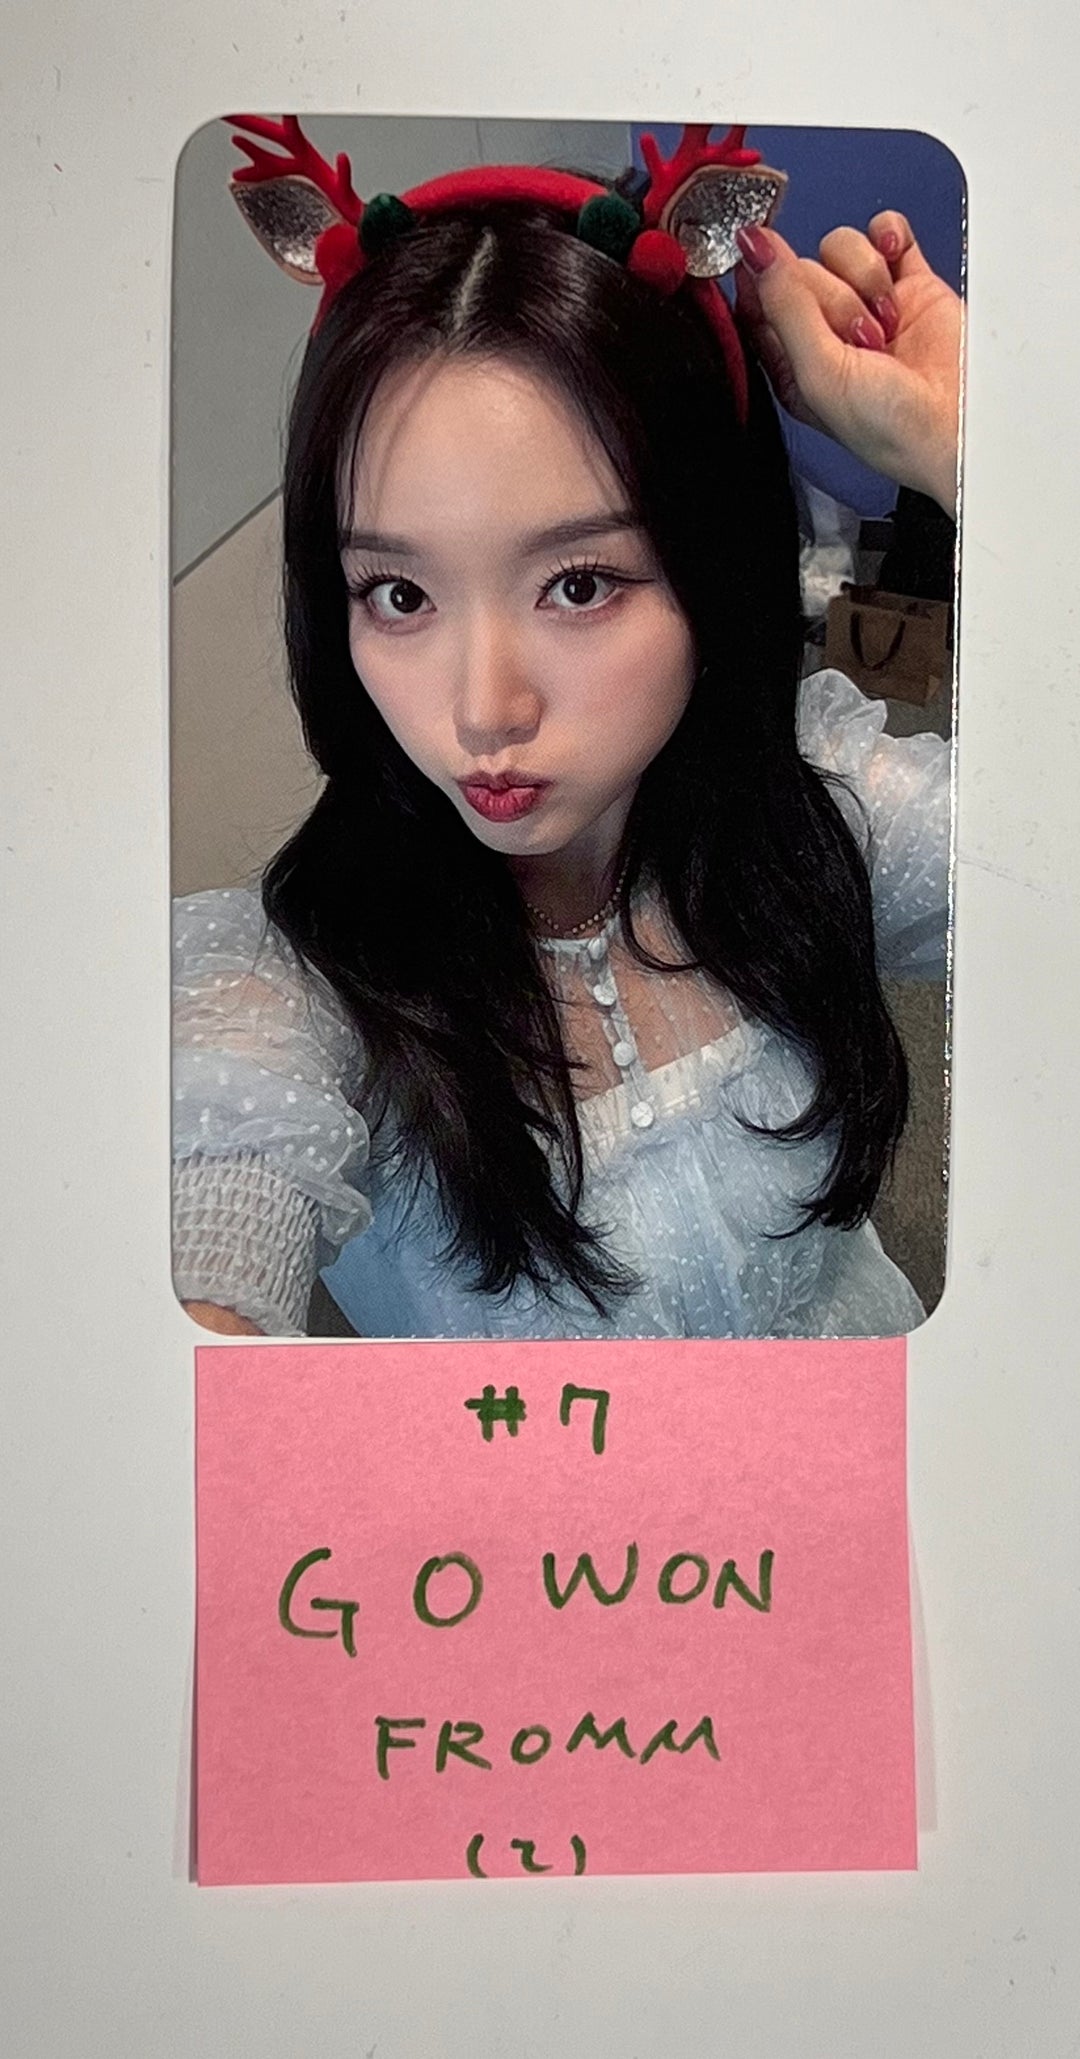 Loossemble "Loossemble" - Fromm Store Fansign Event Photocard Round 2 [23.12.19]